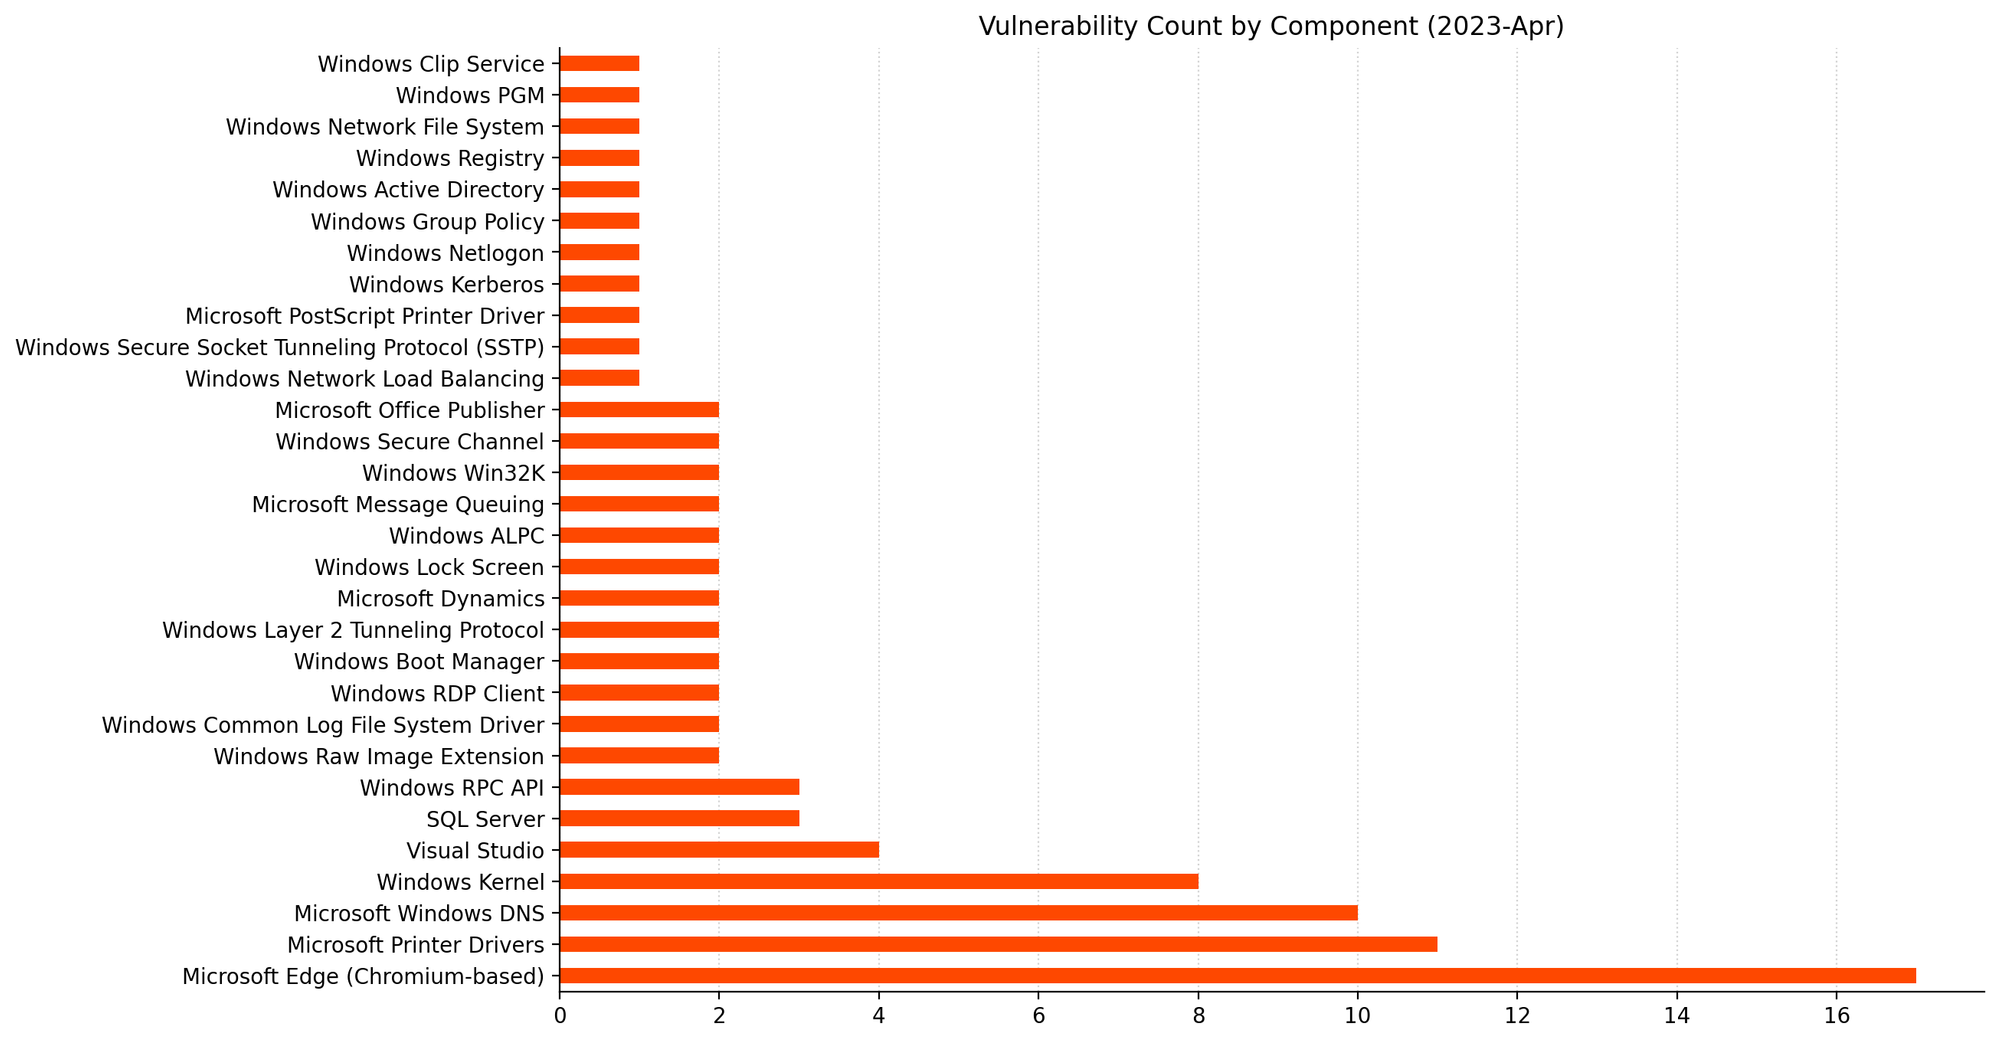 A bar chart showing vulnerability count by component for Microsoft Patch Tuesday April 2023. Microsoft Printer Drivers and Windows DNS account for many of the vulnerabilities.